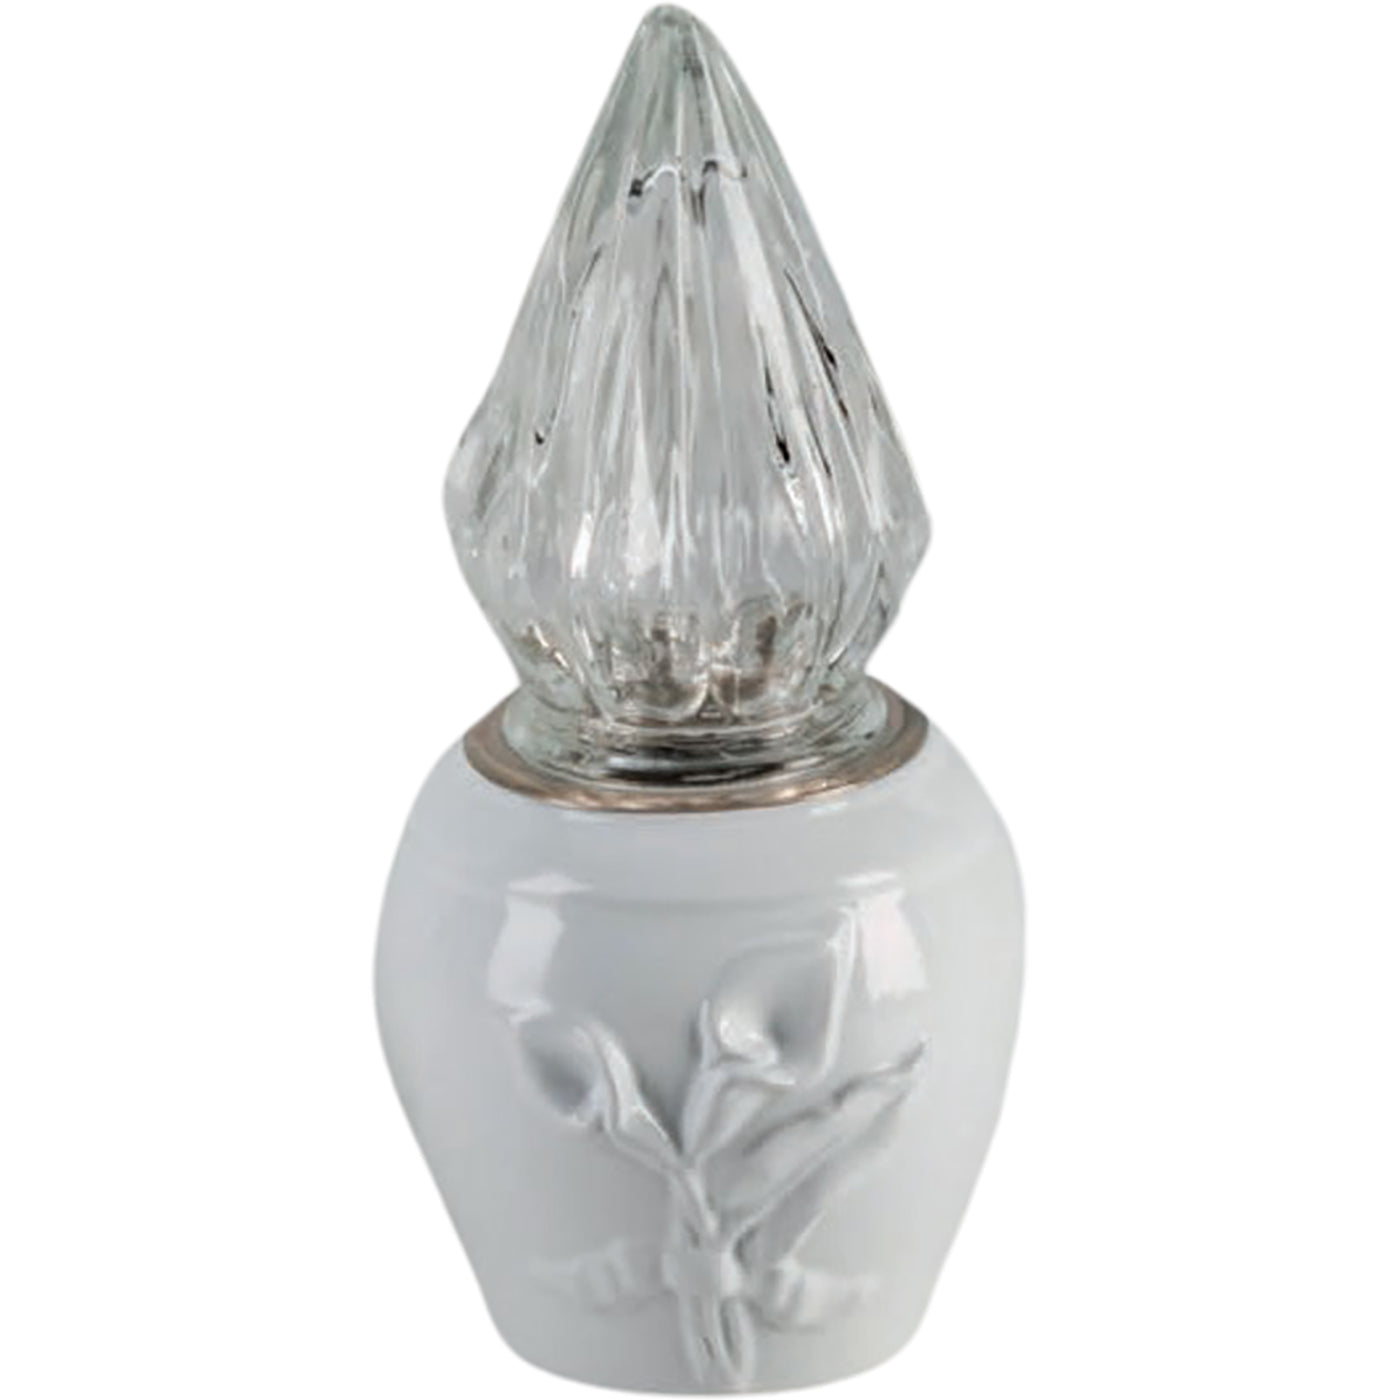 Grave light Calla 10x10cm - 3.9x3.9in In white porcelain, ground attached CAL164T